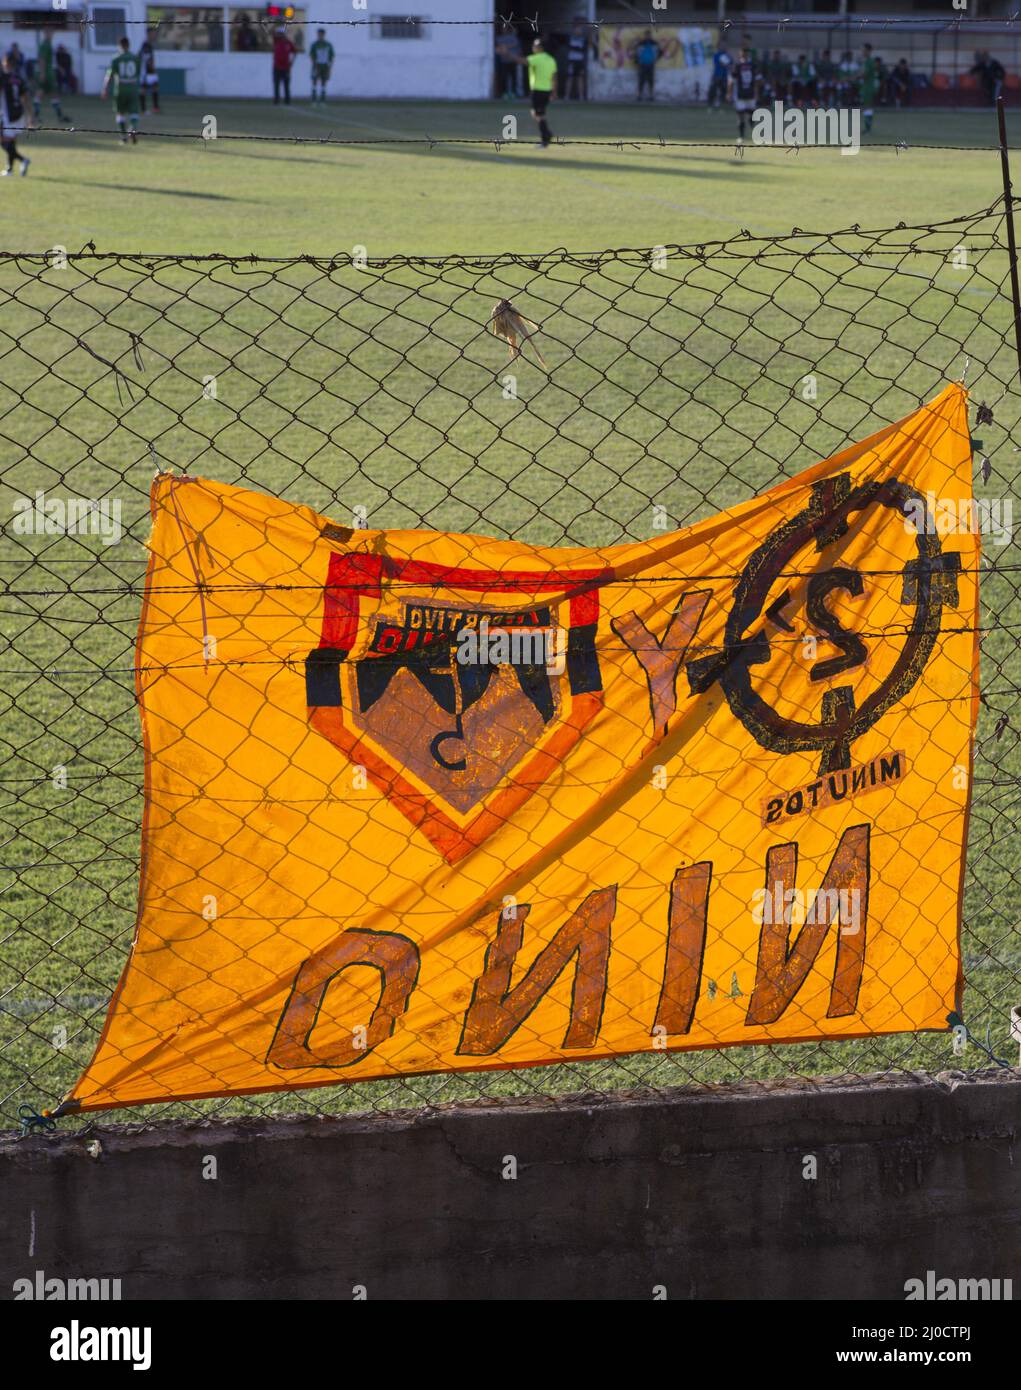 Flag in stadion Stock Photo